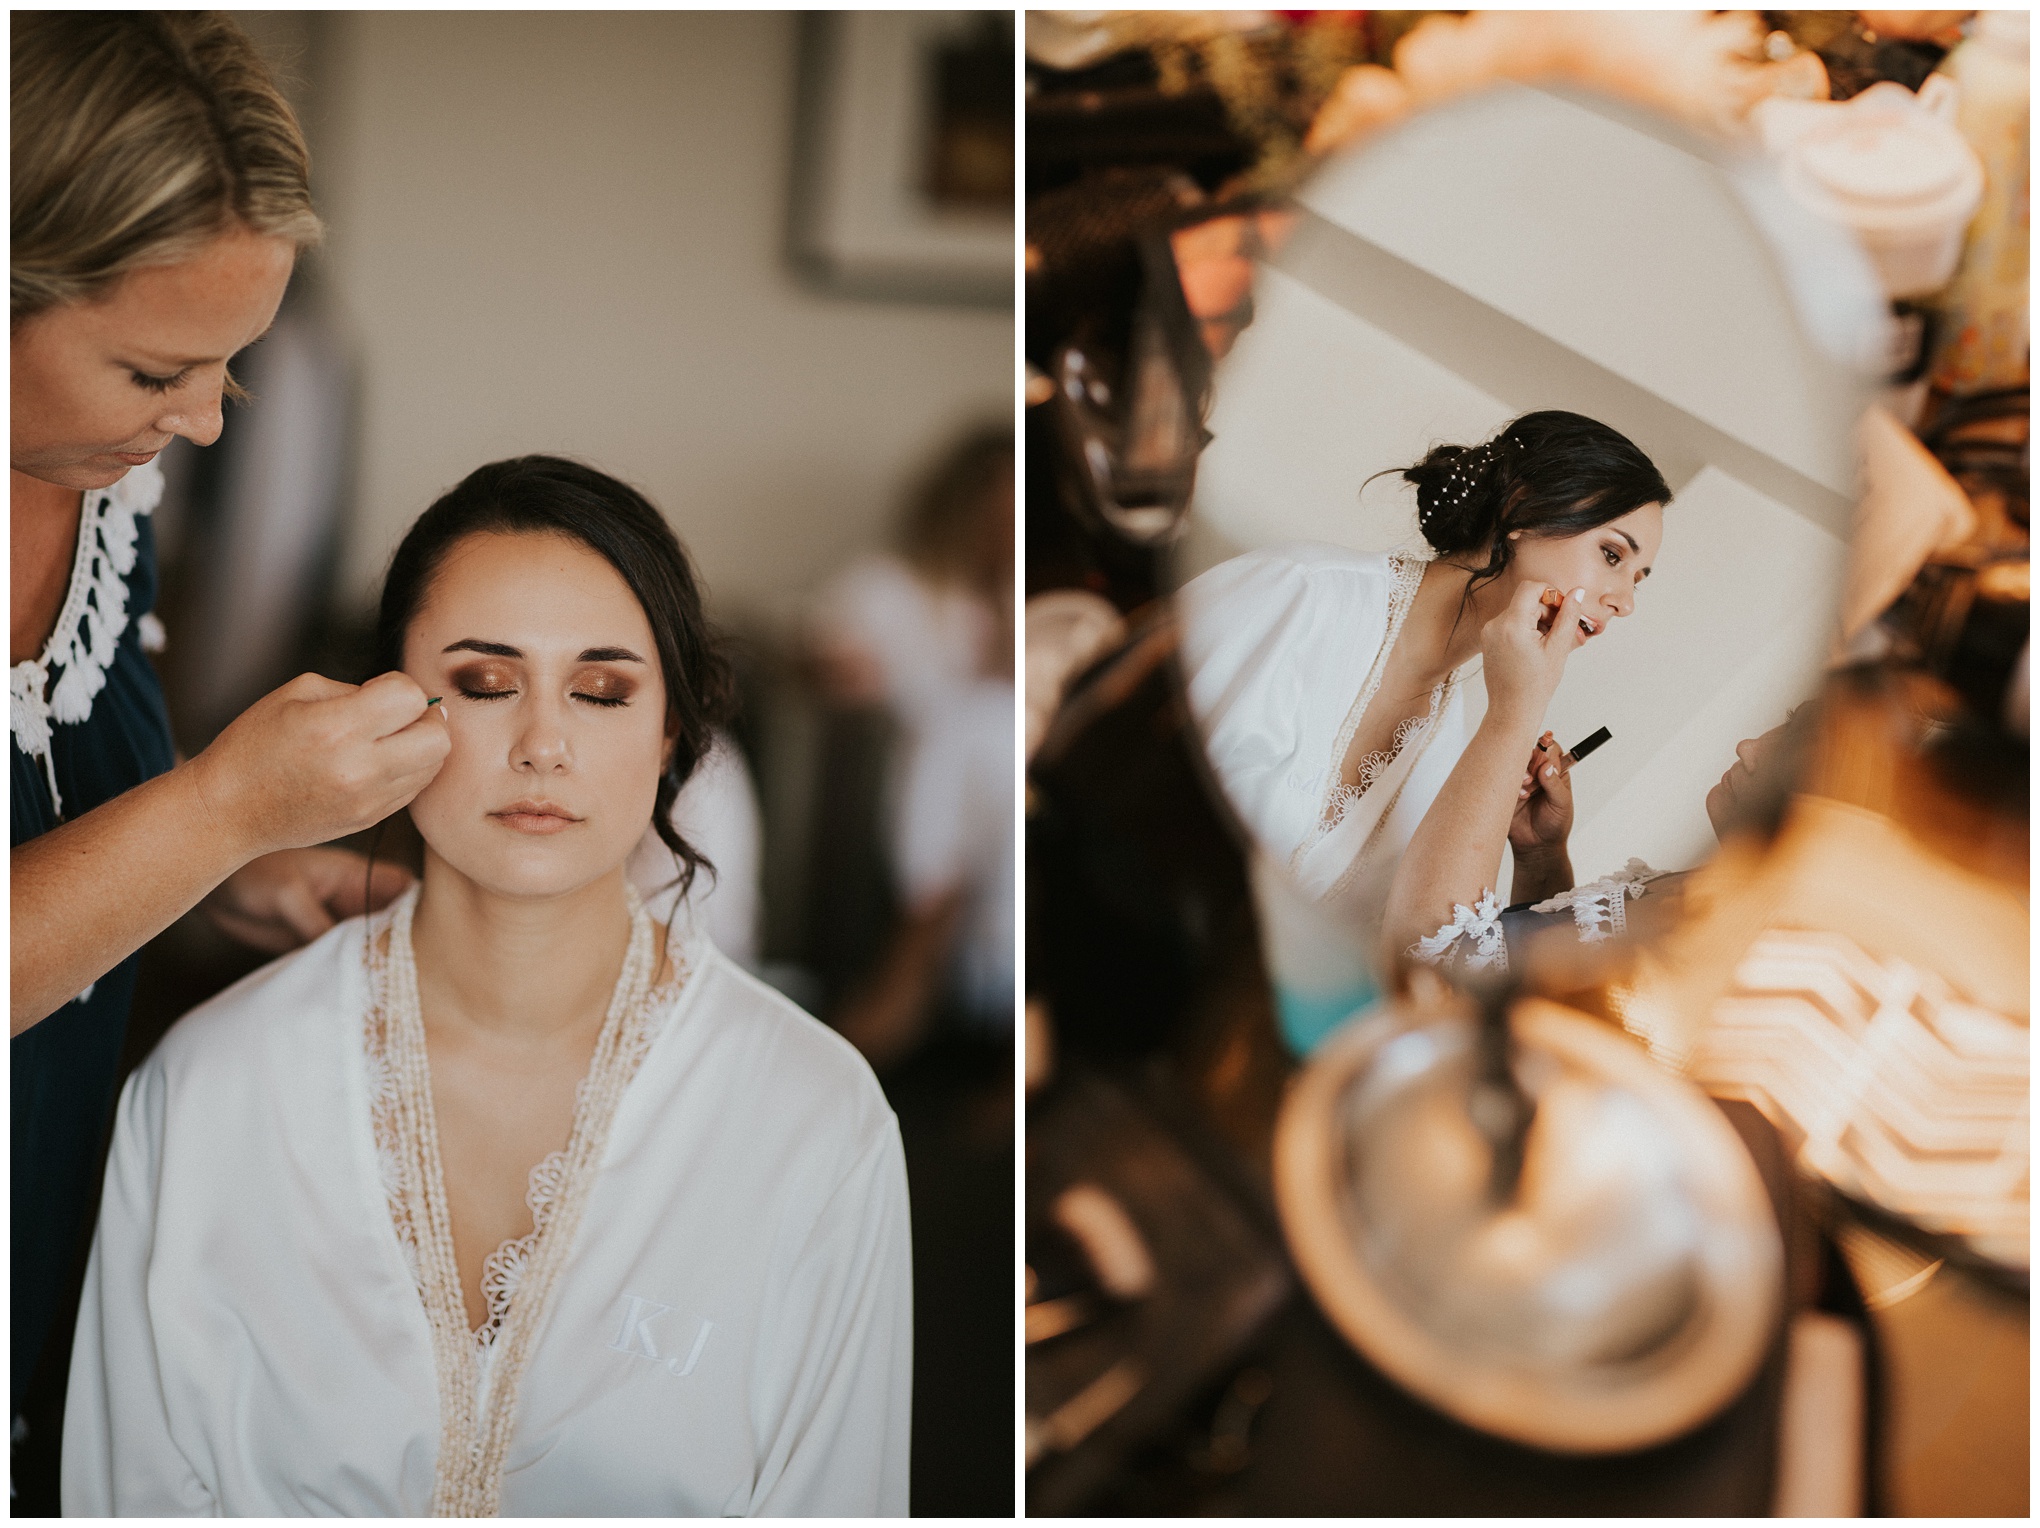 Lakewold Gardens Wedding by Sarah Anne Photography